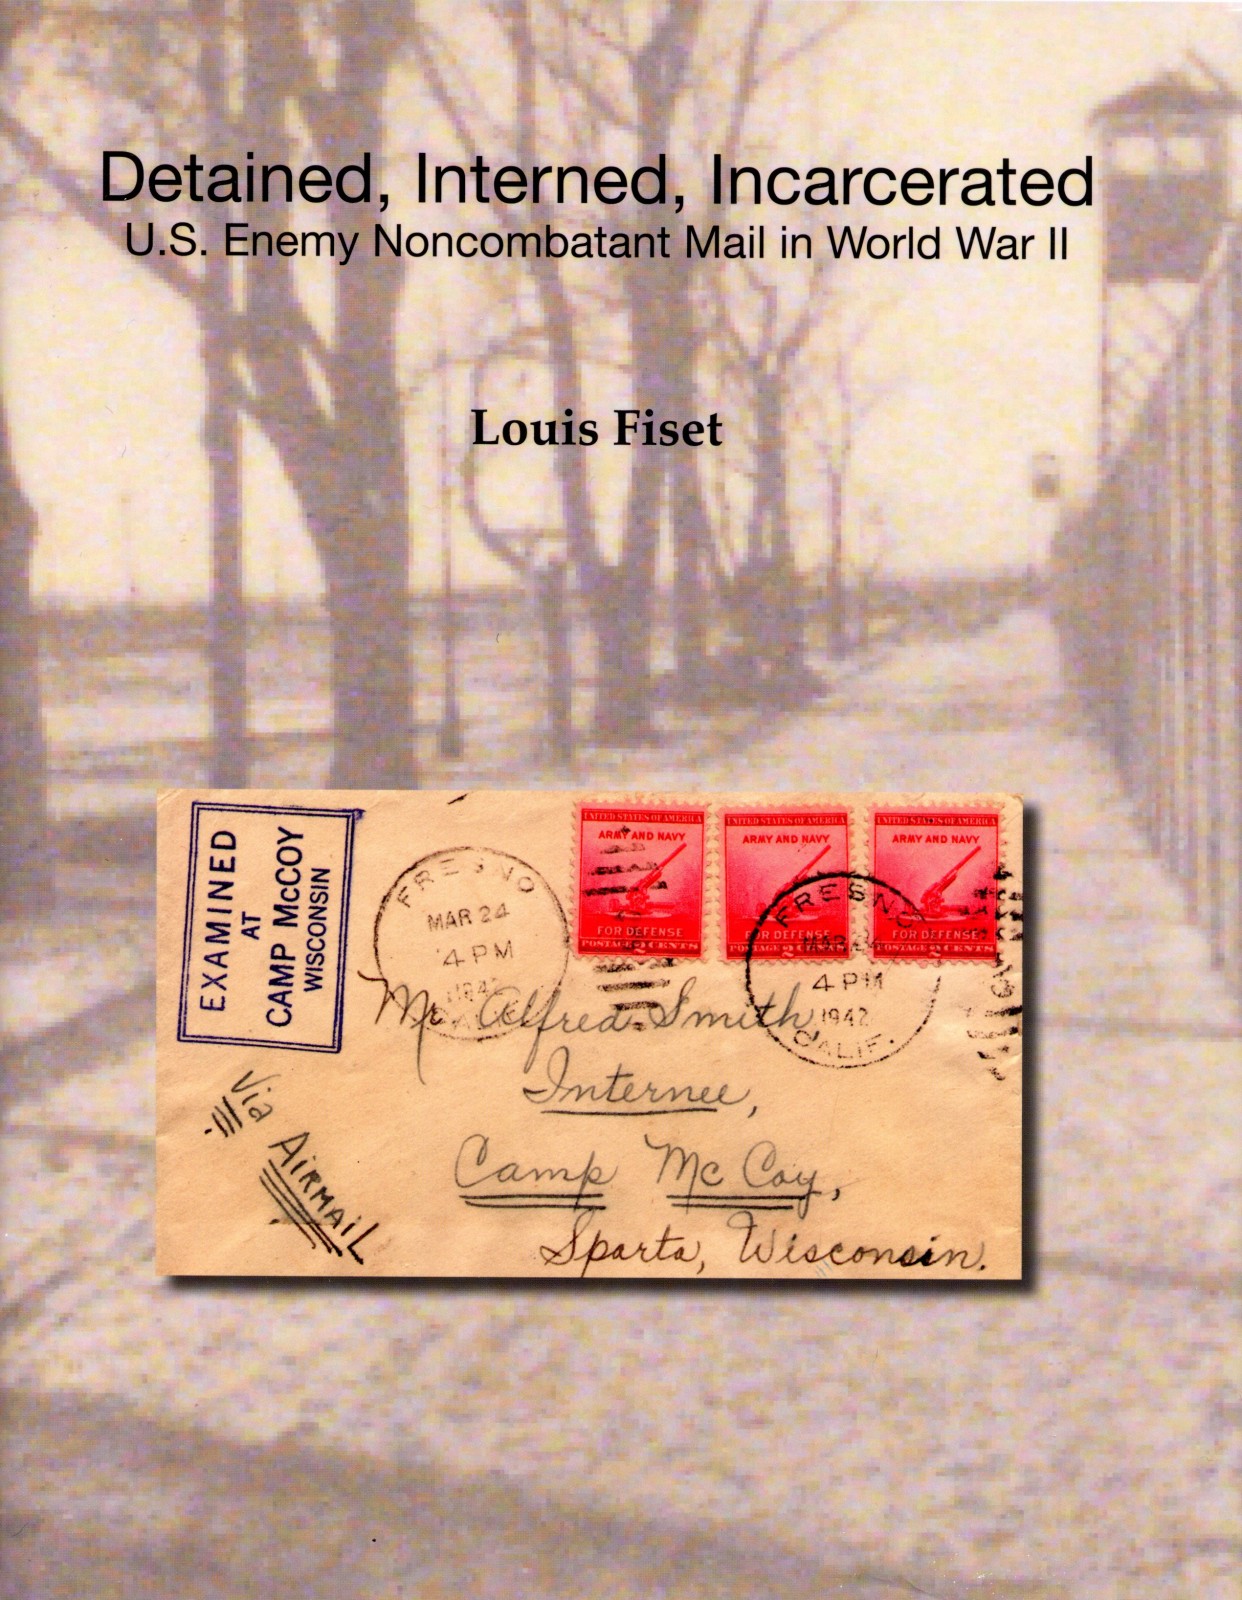 The cover art to Louis Fiset's book on Japanese internment camps told through mail correspondence.